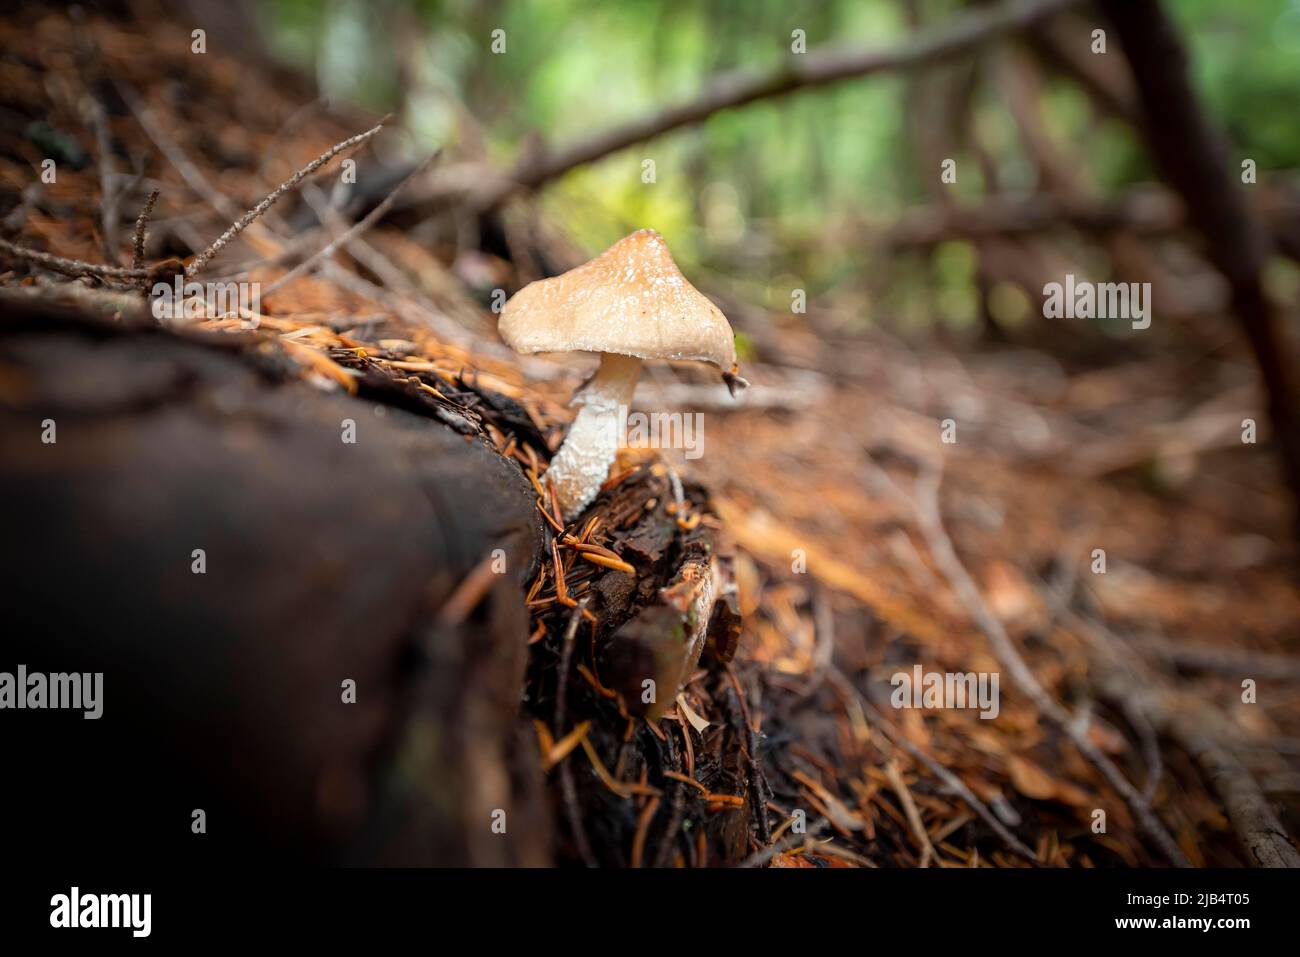 Roof fungus (Pluteus), grows on a fallen tree trunk, on forest floor, Canada Stock Photo